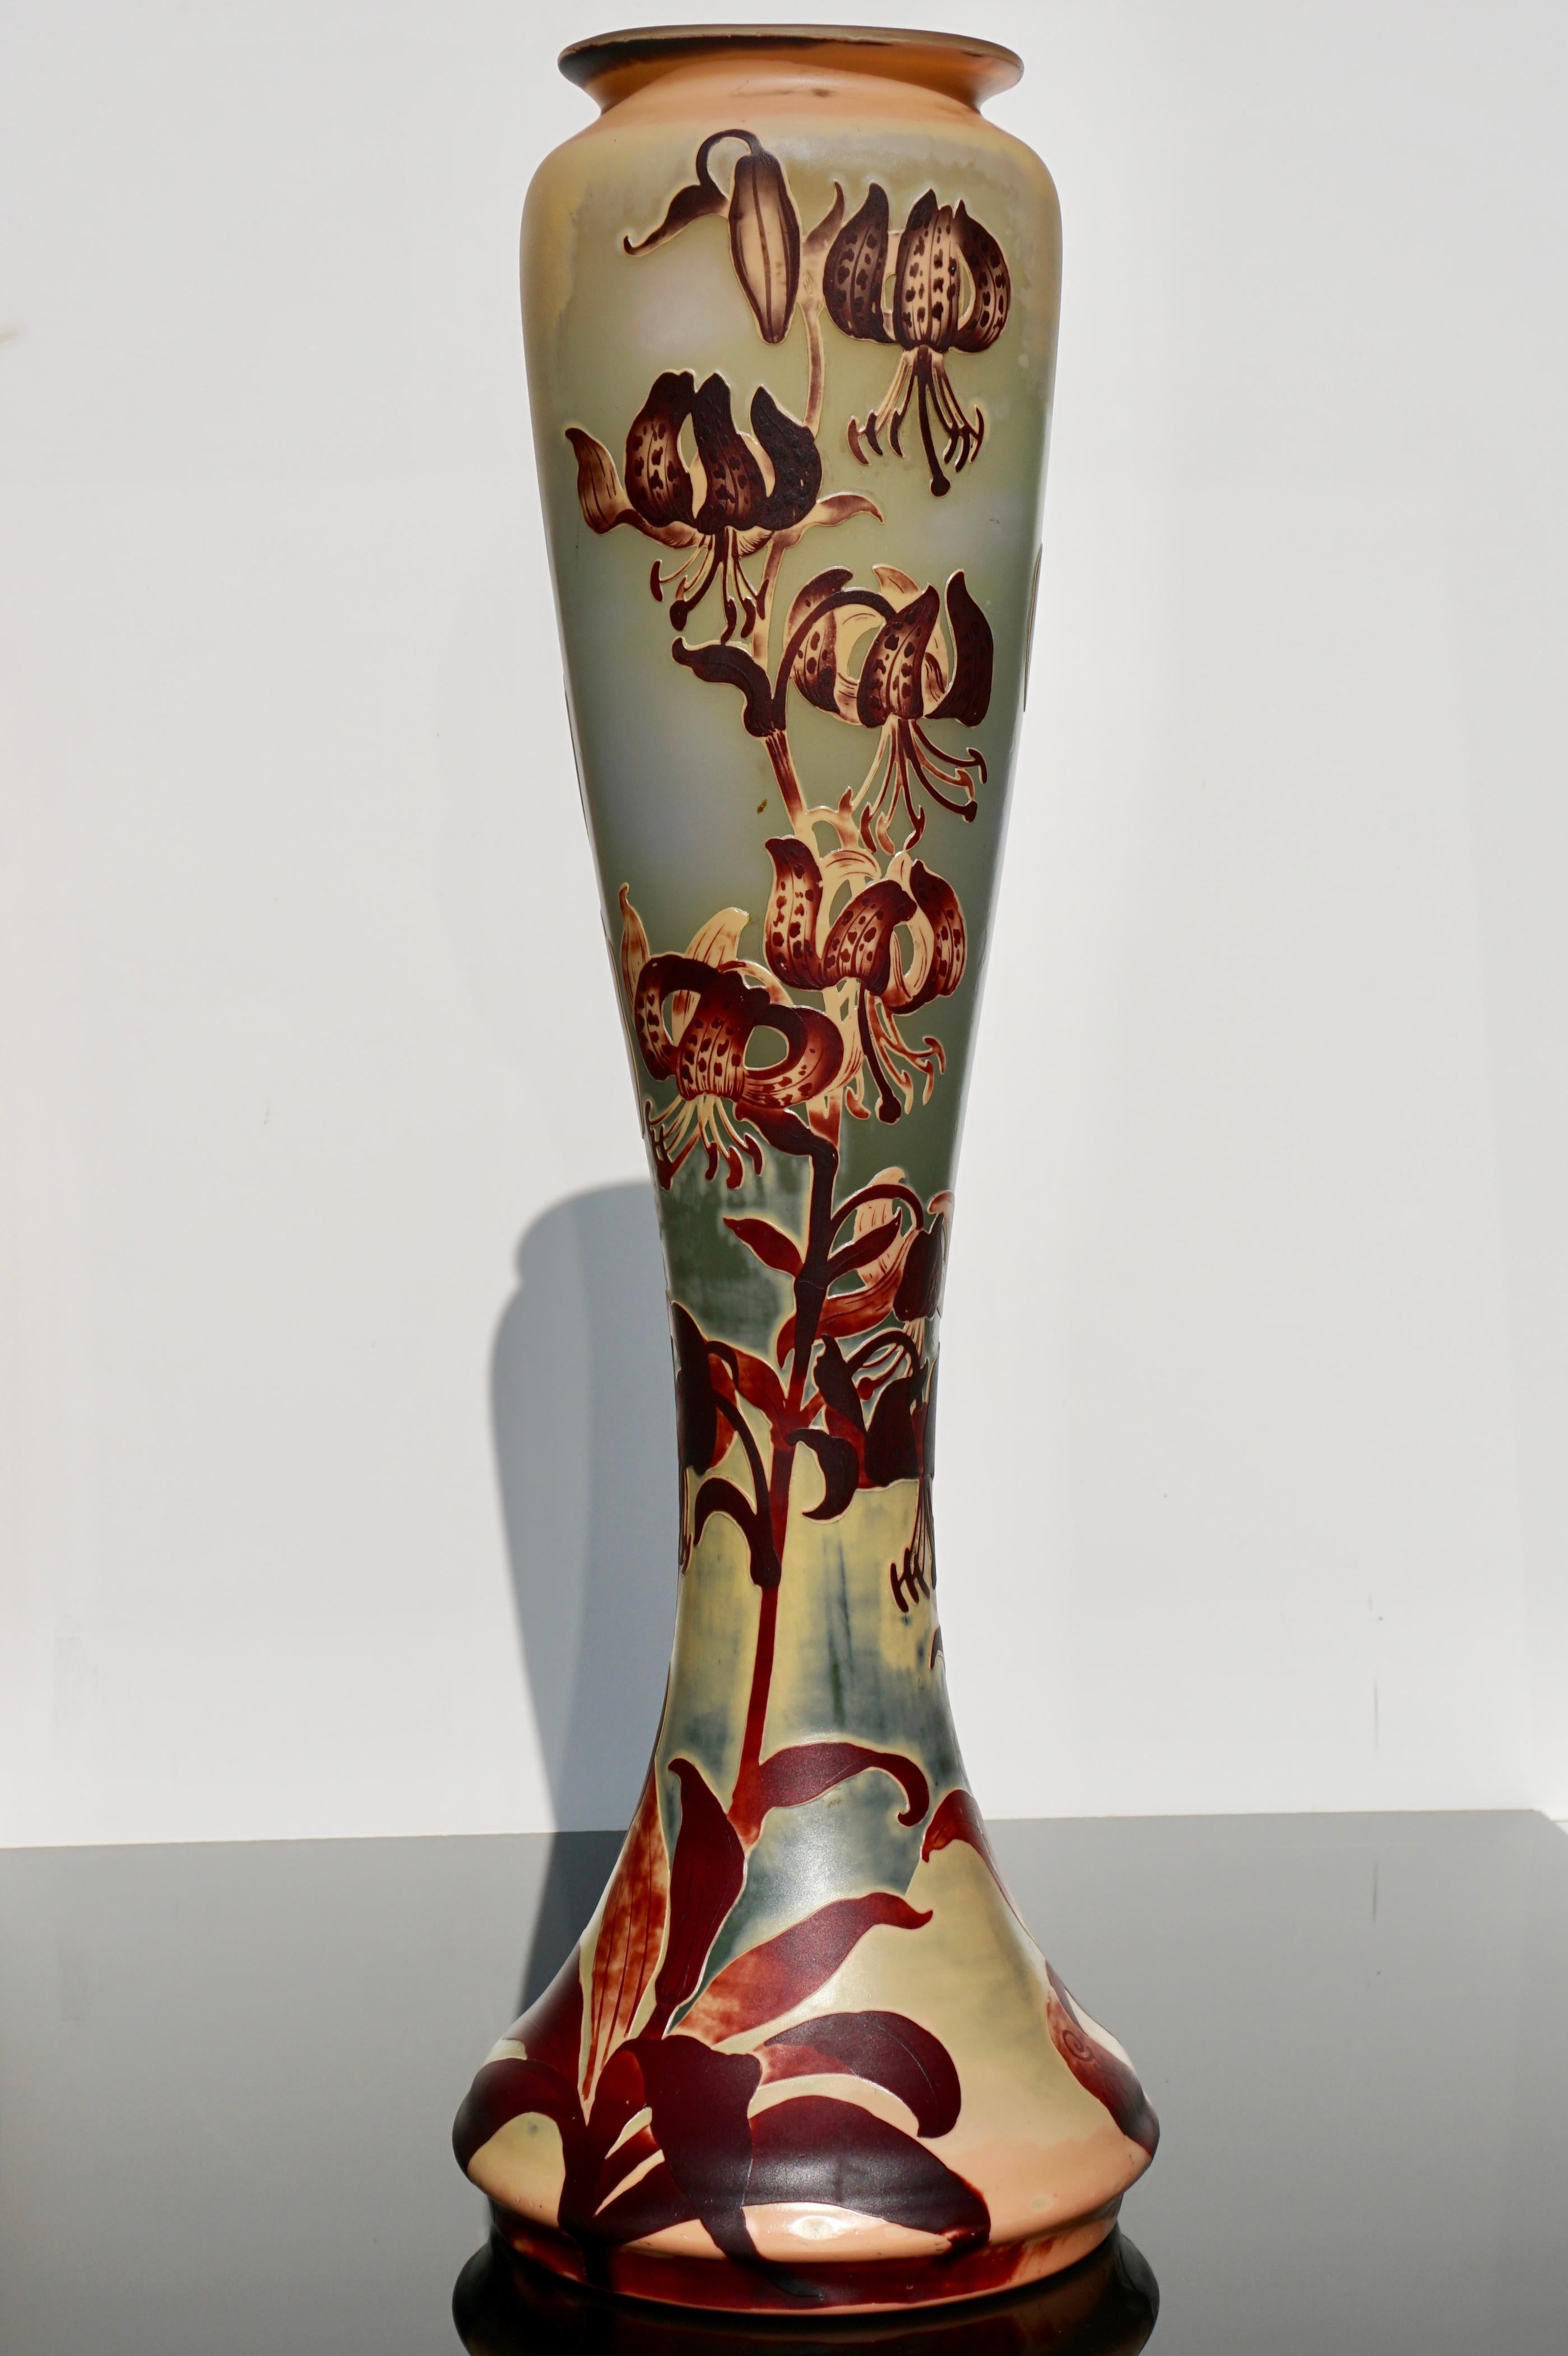 A rare and wonderful Art Nouveau Emile Galle tall 23.3 Inch three-color acid etched floor vase. I have seen this form before but never this size and never with these stunning Tiger Lilys in these contrasting colors. A rare and beautiful addition to